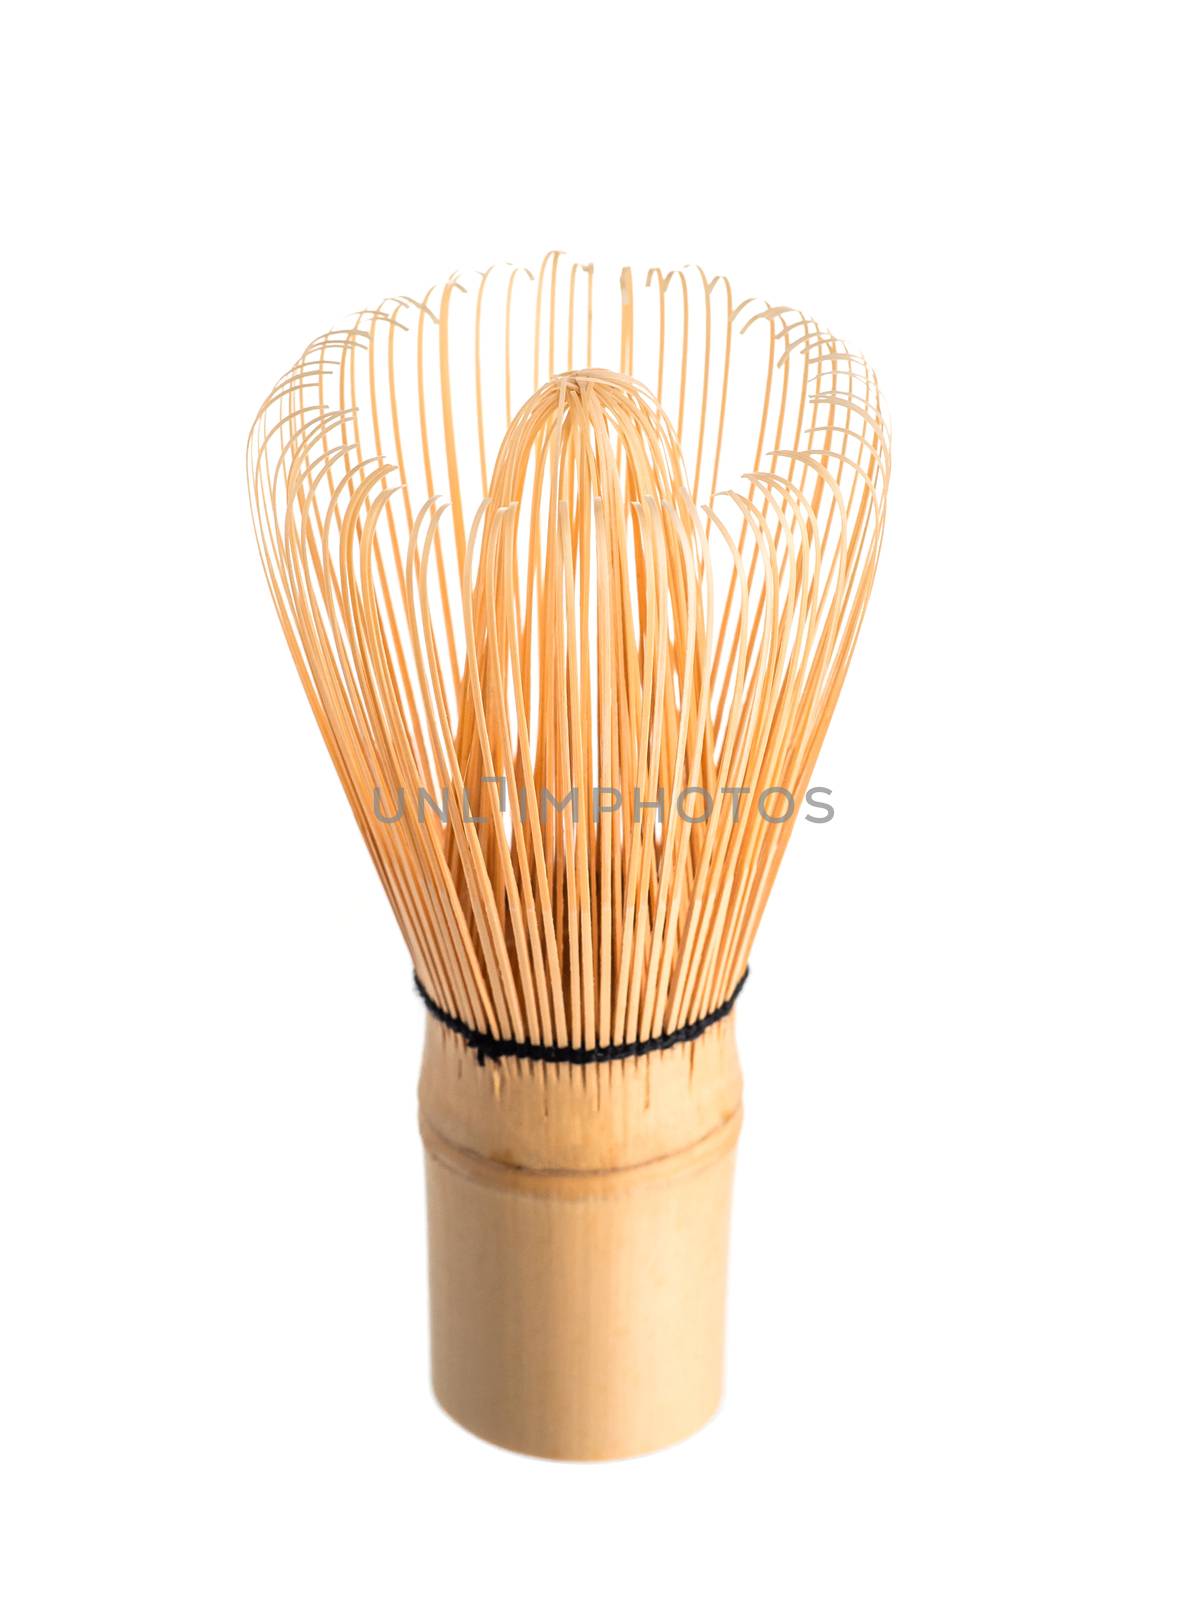 Bamboo Matcha Tea Whisk or chasen isolated white by fascinadora